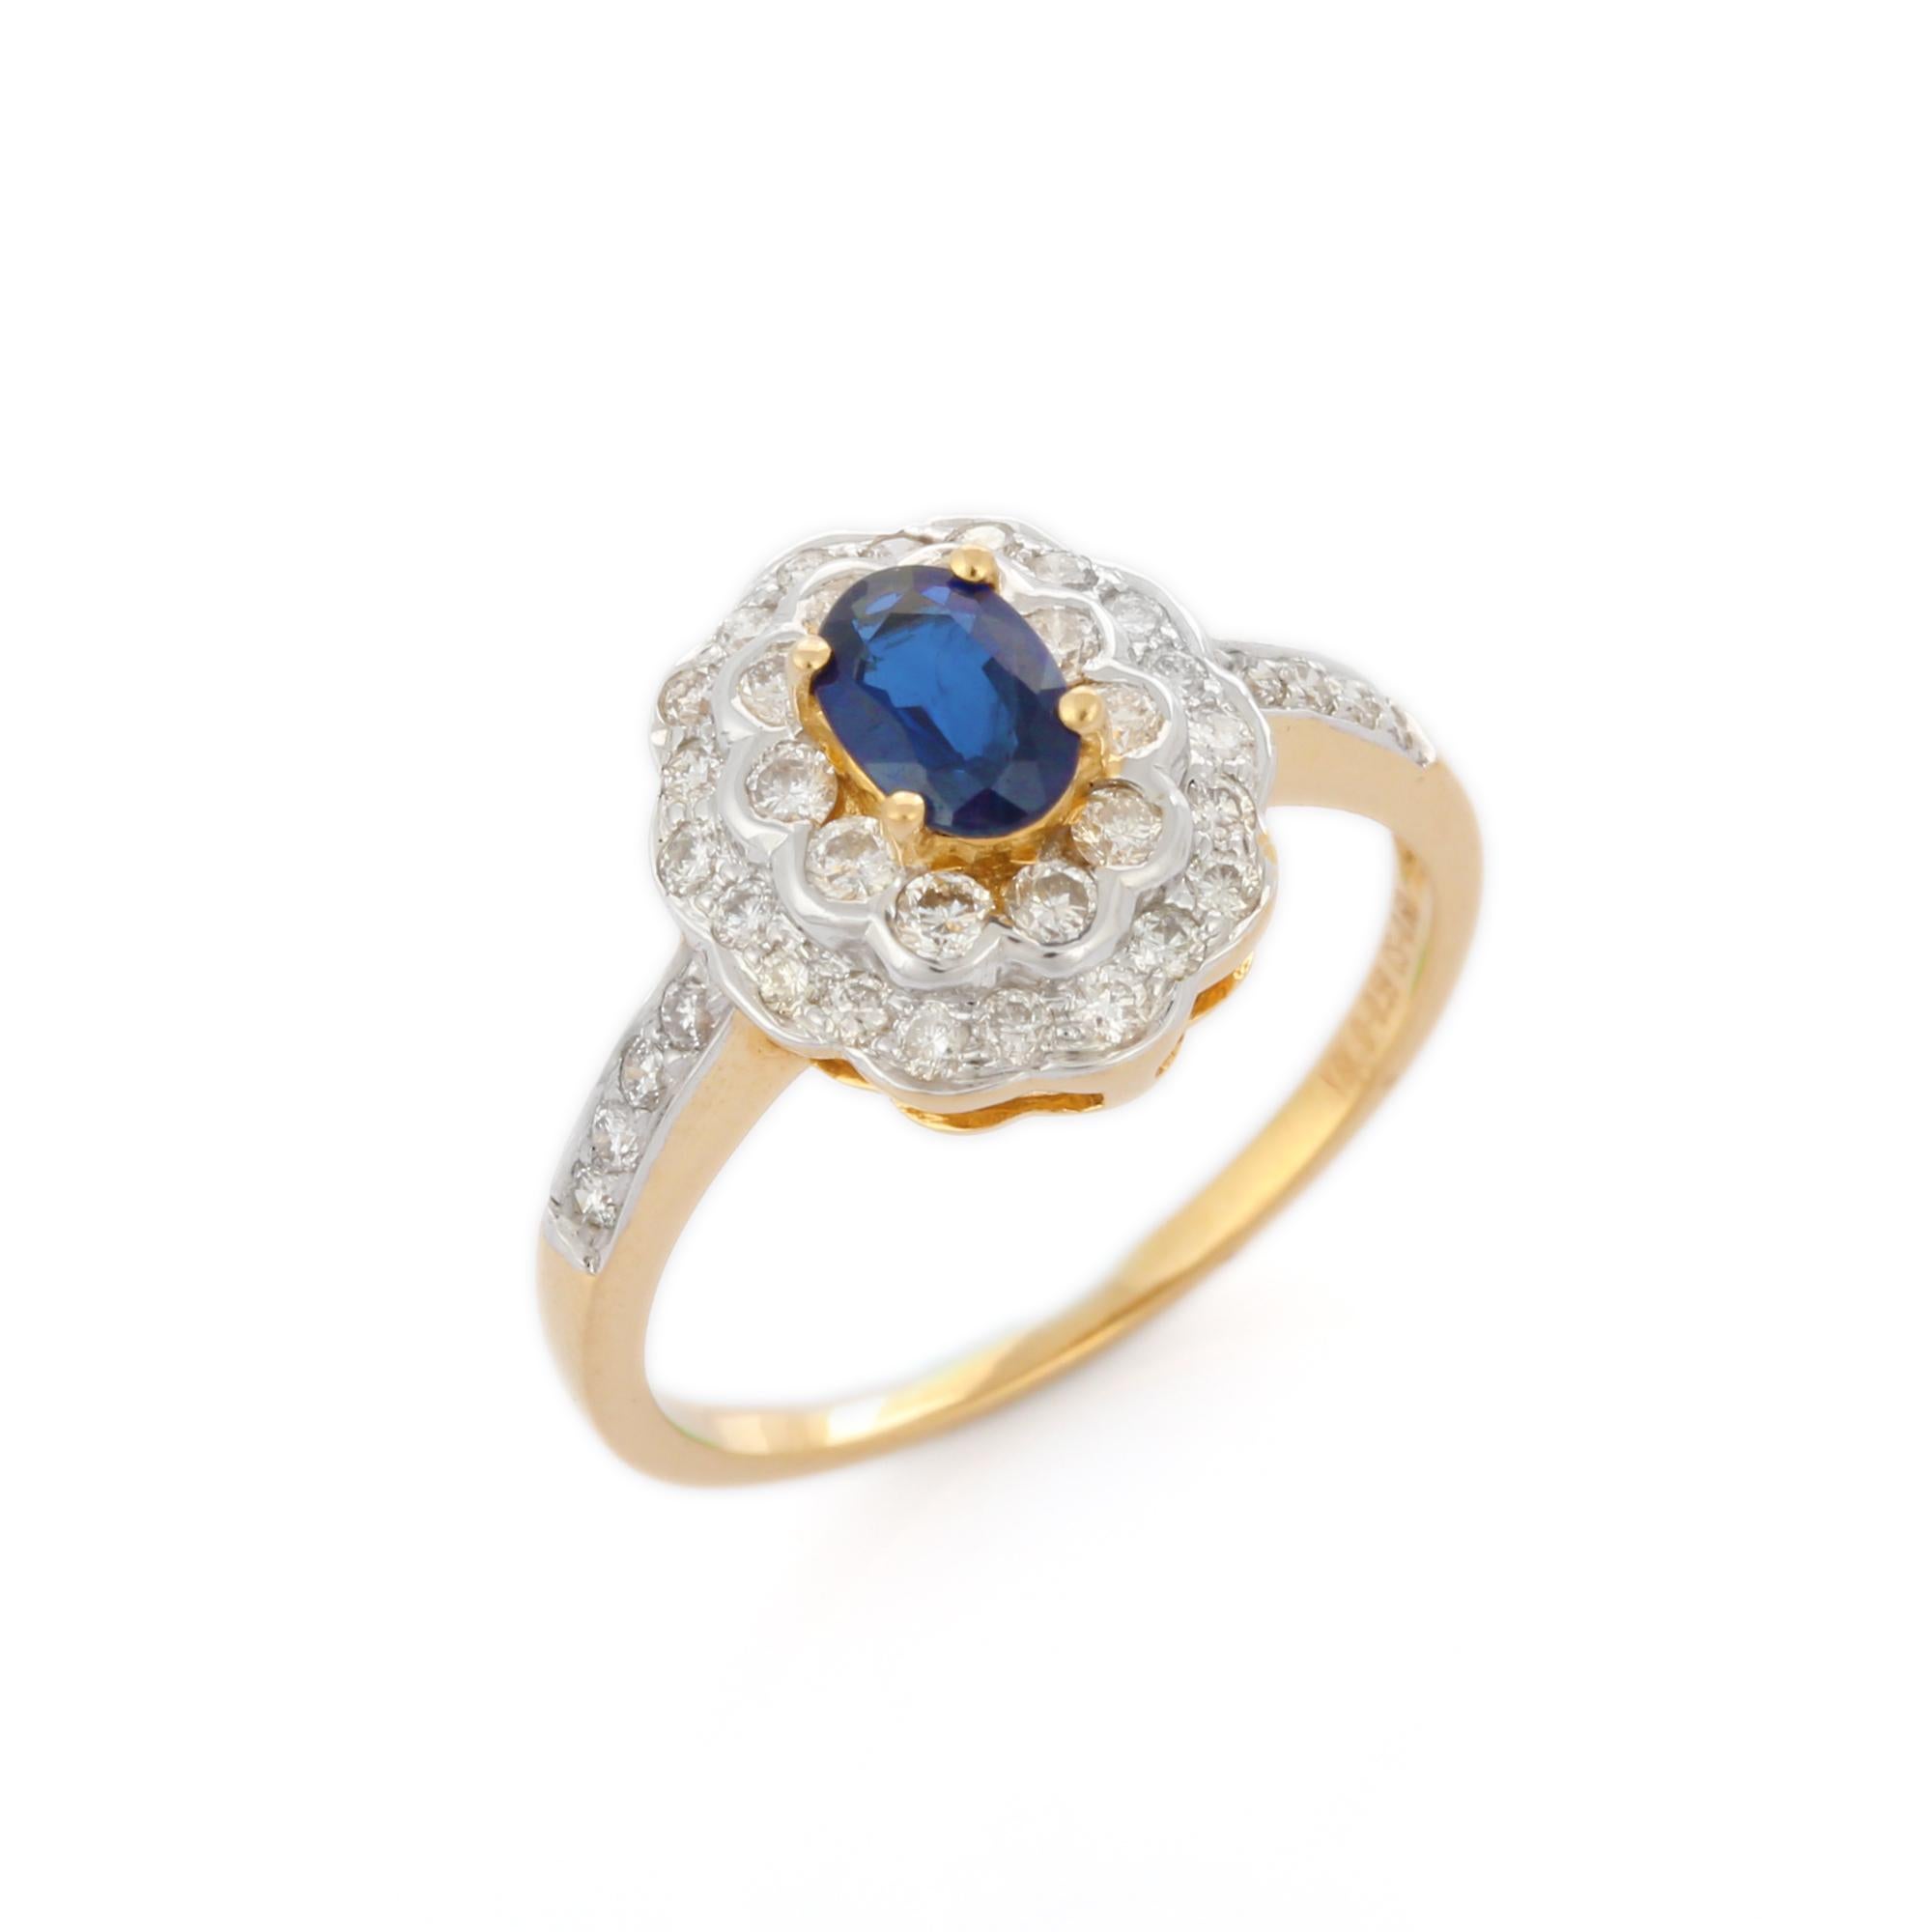 For Sale:  Big Floral Blue Sapphire Cocktail Ring with Inlaid Diamonds in 18K Yellow Gold 5